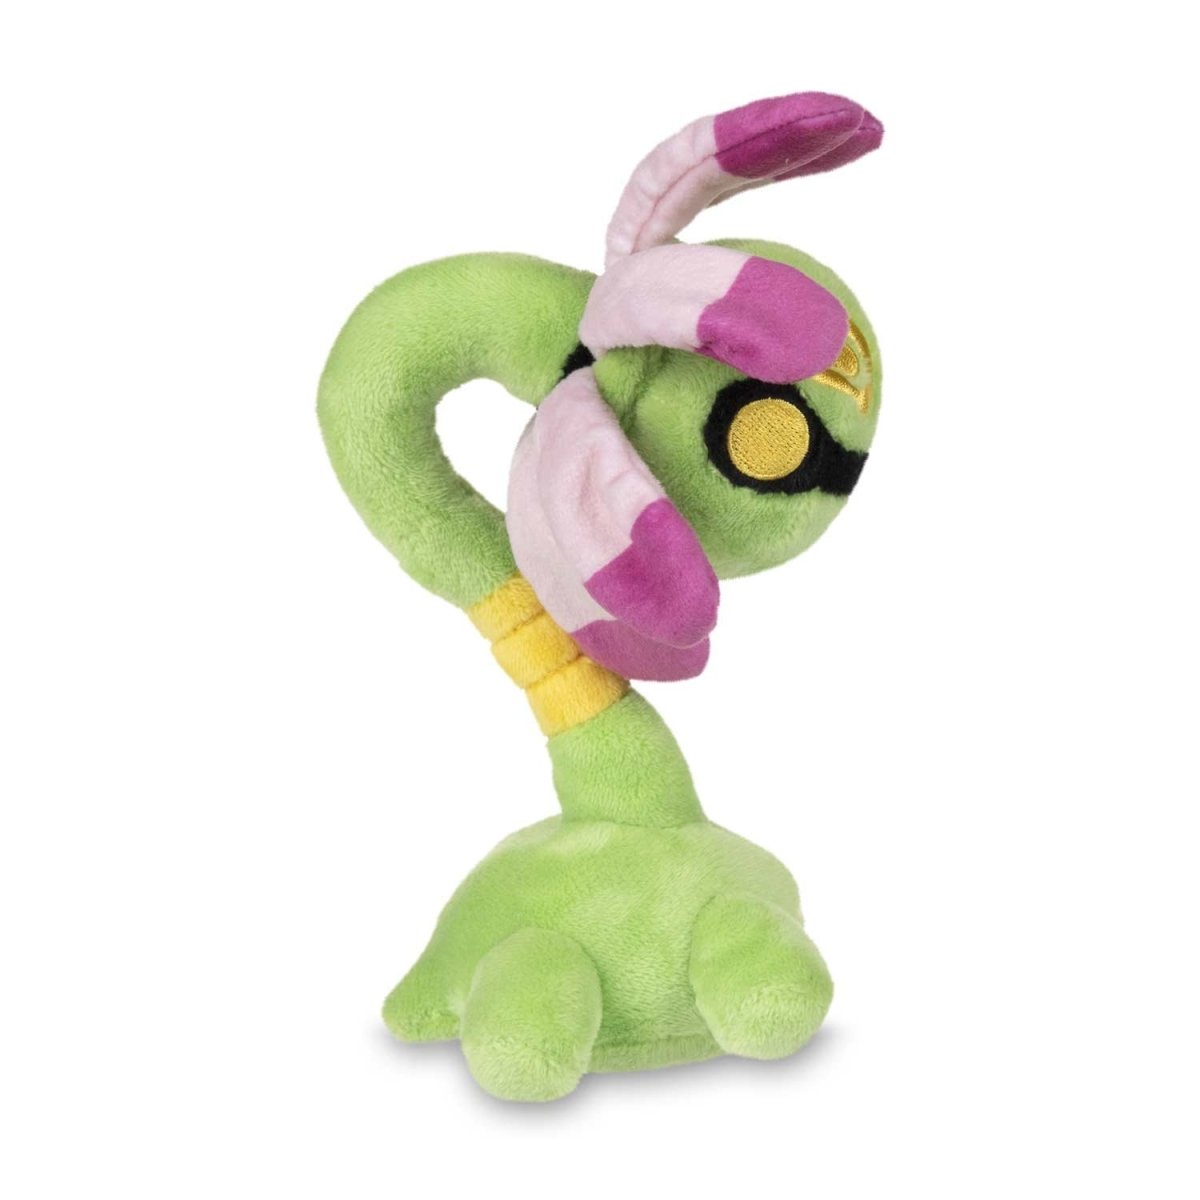 Cradily Sitting Cuties Plush - 5 ½ In. | Pokémon Center Official Site